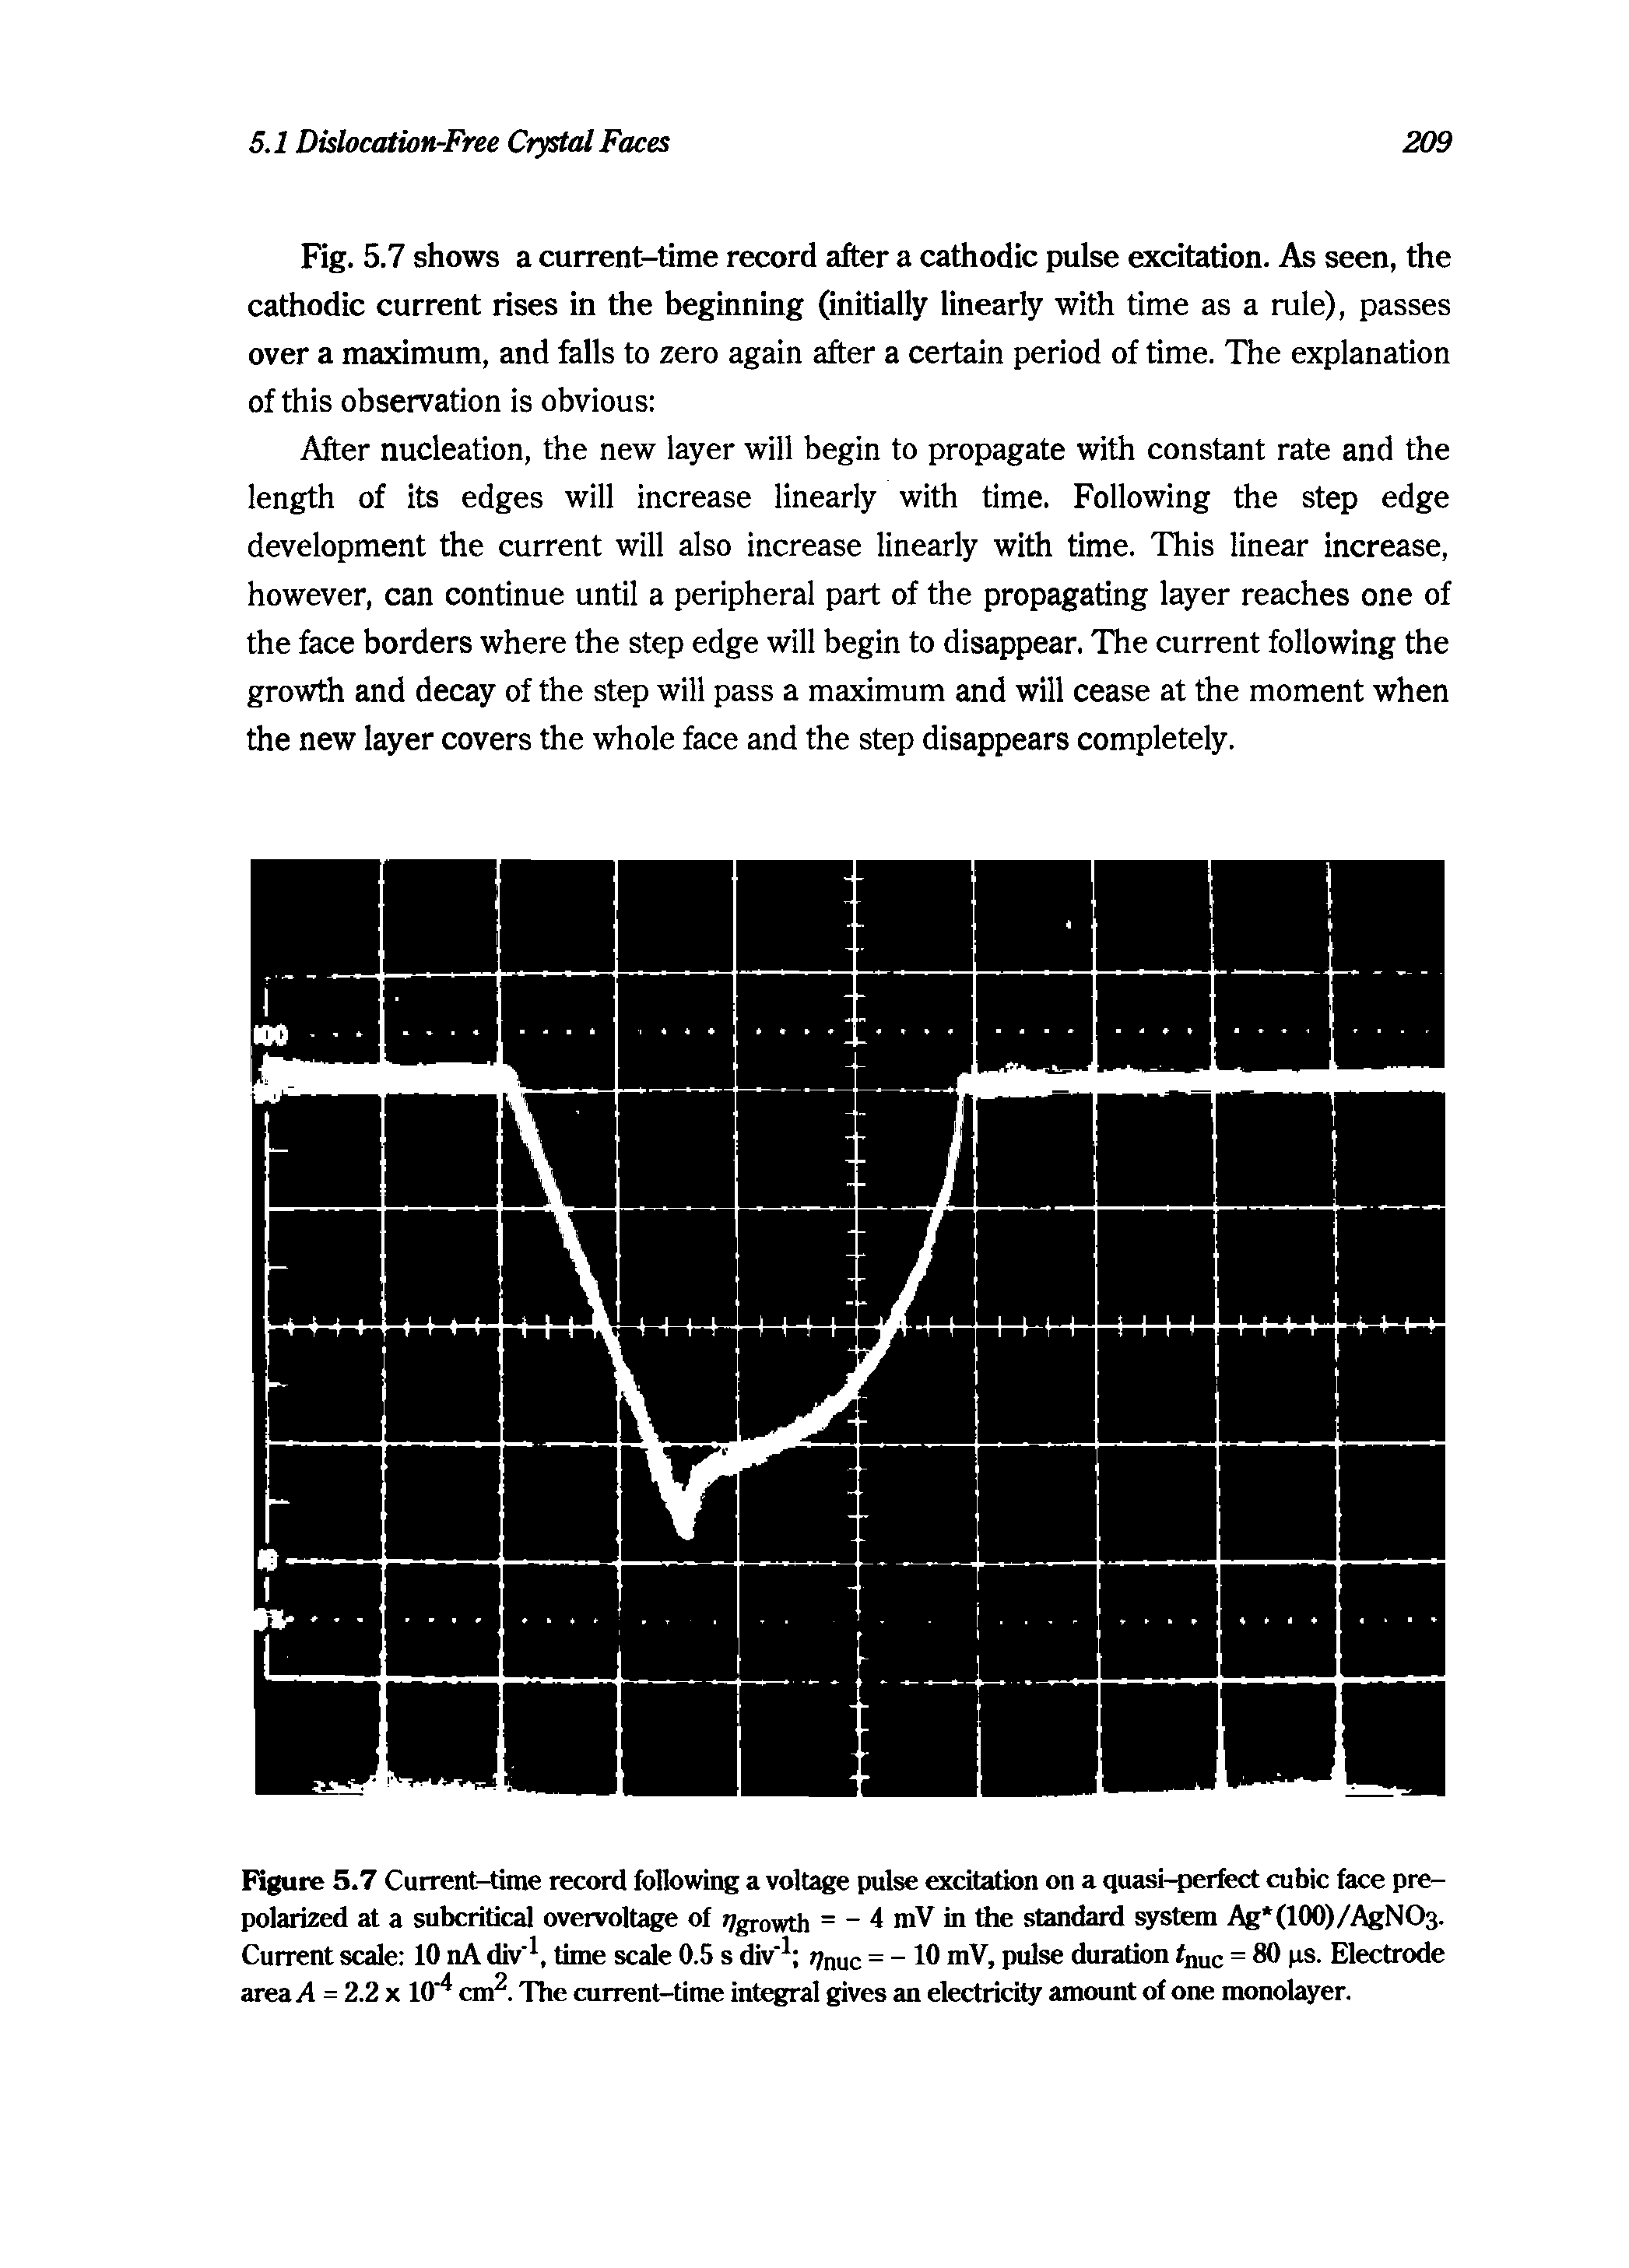 Figure 5.7 Current-time record following a voltage pulse excitation on a quasi-perfect cubic face prepolarized at a subcritical overvoltage of //growth = - 4 mV in the standard system Ag (100)/AgNO3. Current scale 10 nA div time scale 0.5 s div" //nuc = - 10 mV, pulse duration fnuc = 80 ps. Electrode areaA = 2.2 x 10 cm. The current-time integral gives an electricity amount of one monolayer.